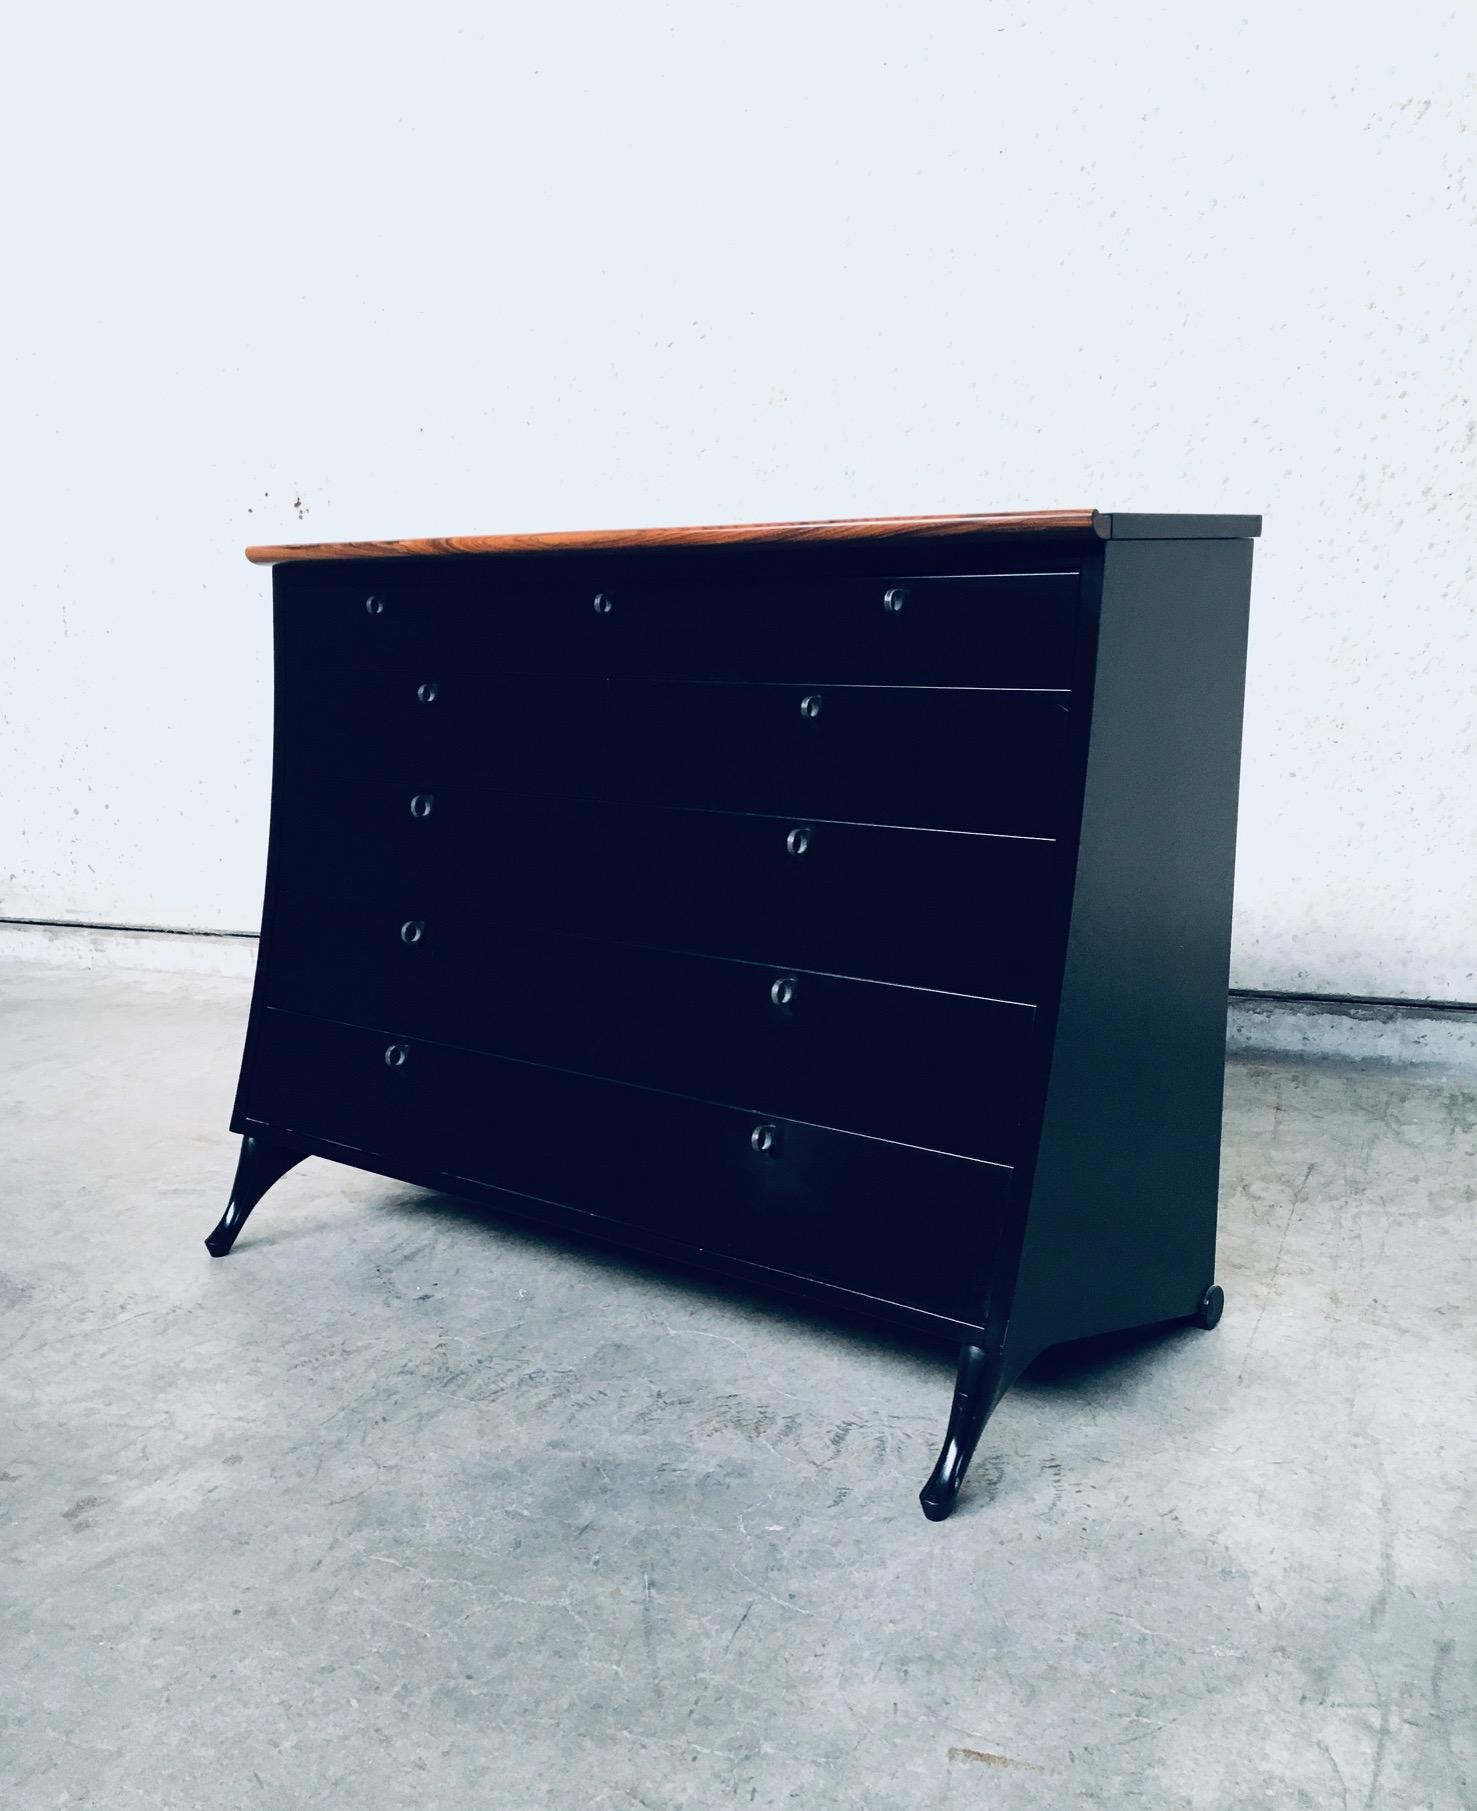 Postmodern Modern Design Chest of drawers by Umberto Asnago for Giorgetti, made in Italy 1980's. Rare chest of drawers / commode. Black laquered wood with palissander trim on front top. Beautifull slanted design which seems to flow at the front. 3